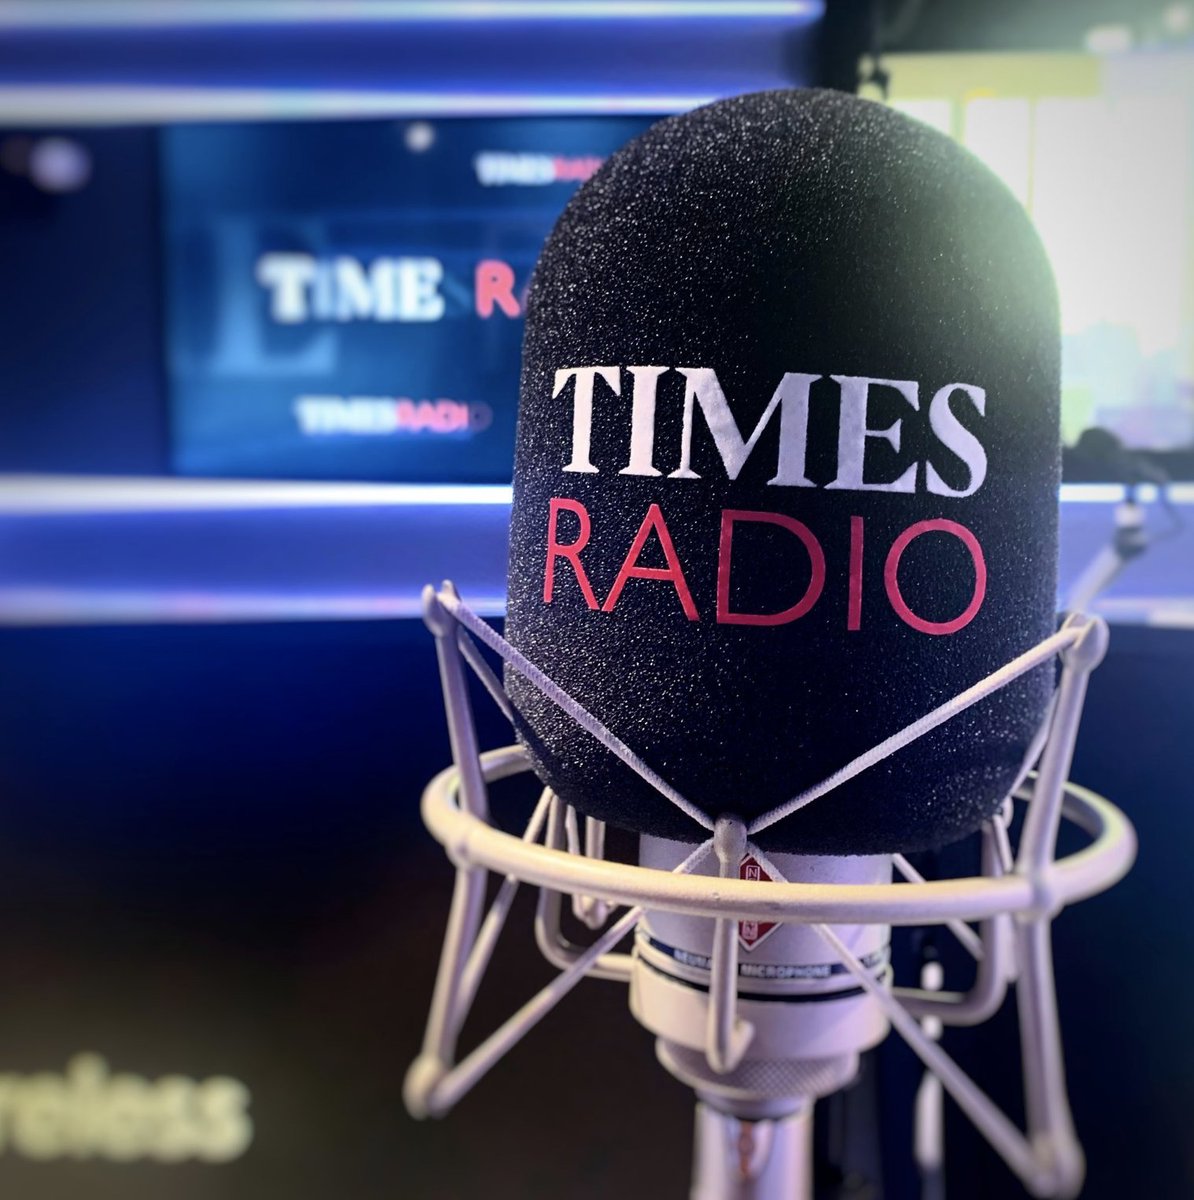 MANY thanks to the brilliant lot who joined me @TimesRadio on Friday. @EllaRobertaFdn, @Nelle_Andrew & @Lyndsey_Fineran on books 📚, @DipoFaloyin on 'Africa Is Not A Country', @HWalker_Brown on 'The Delicate Game', @ChrisSonnex @CardboardCitz, @CarolinePFD @hayfestival